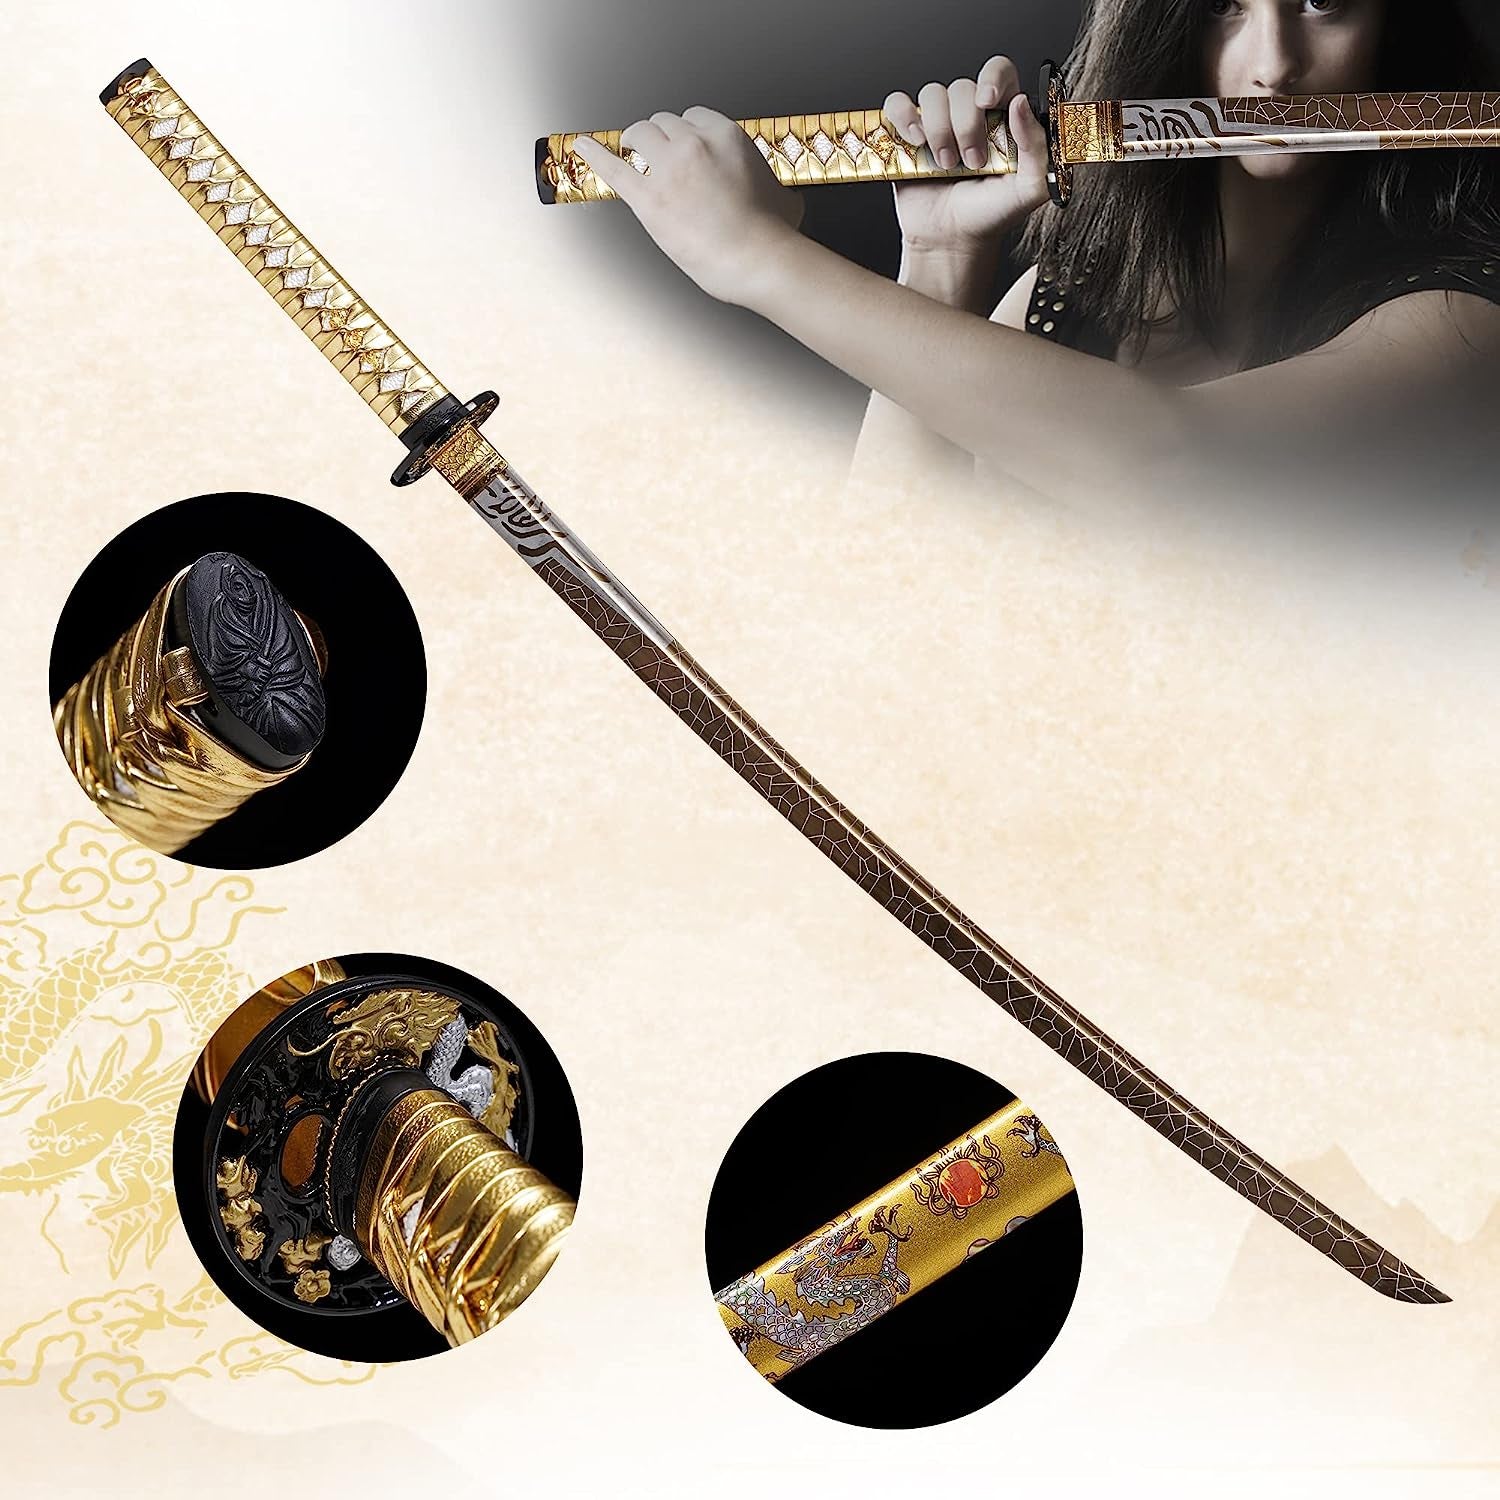 -Samurai Katana Sword Real - Hand Forged 1060 Carbon Steel Blade with Traditional Hardening and Full Tang, for Gift, Cosplay, Collection and Display